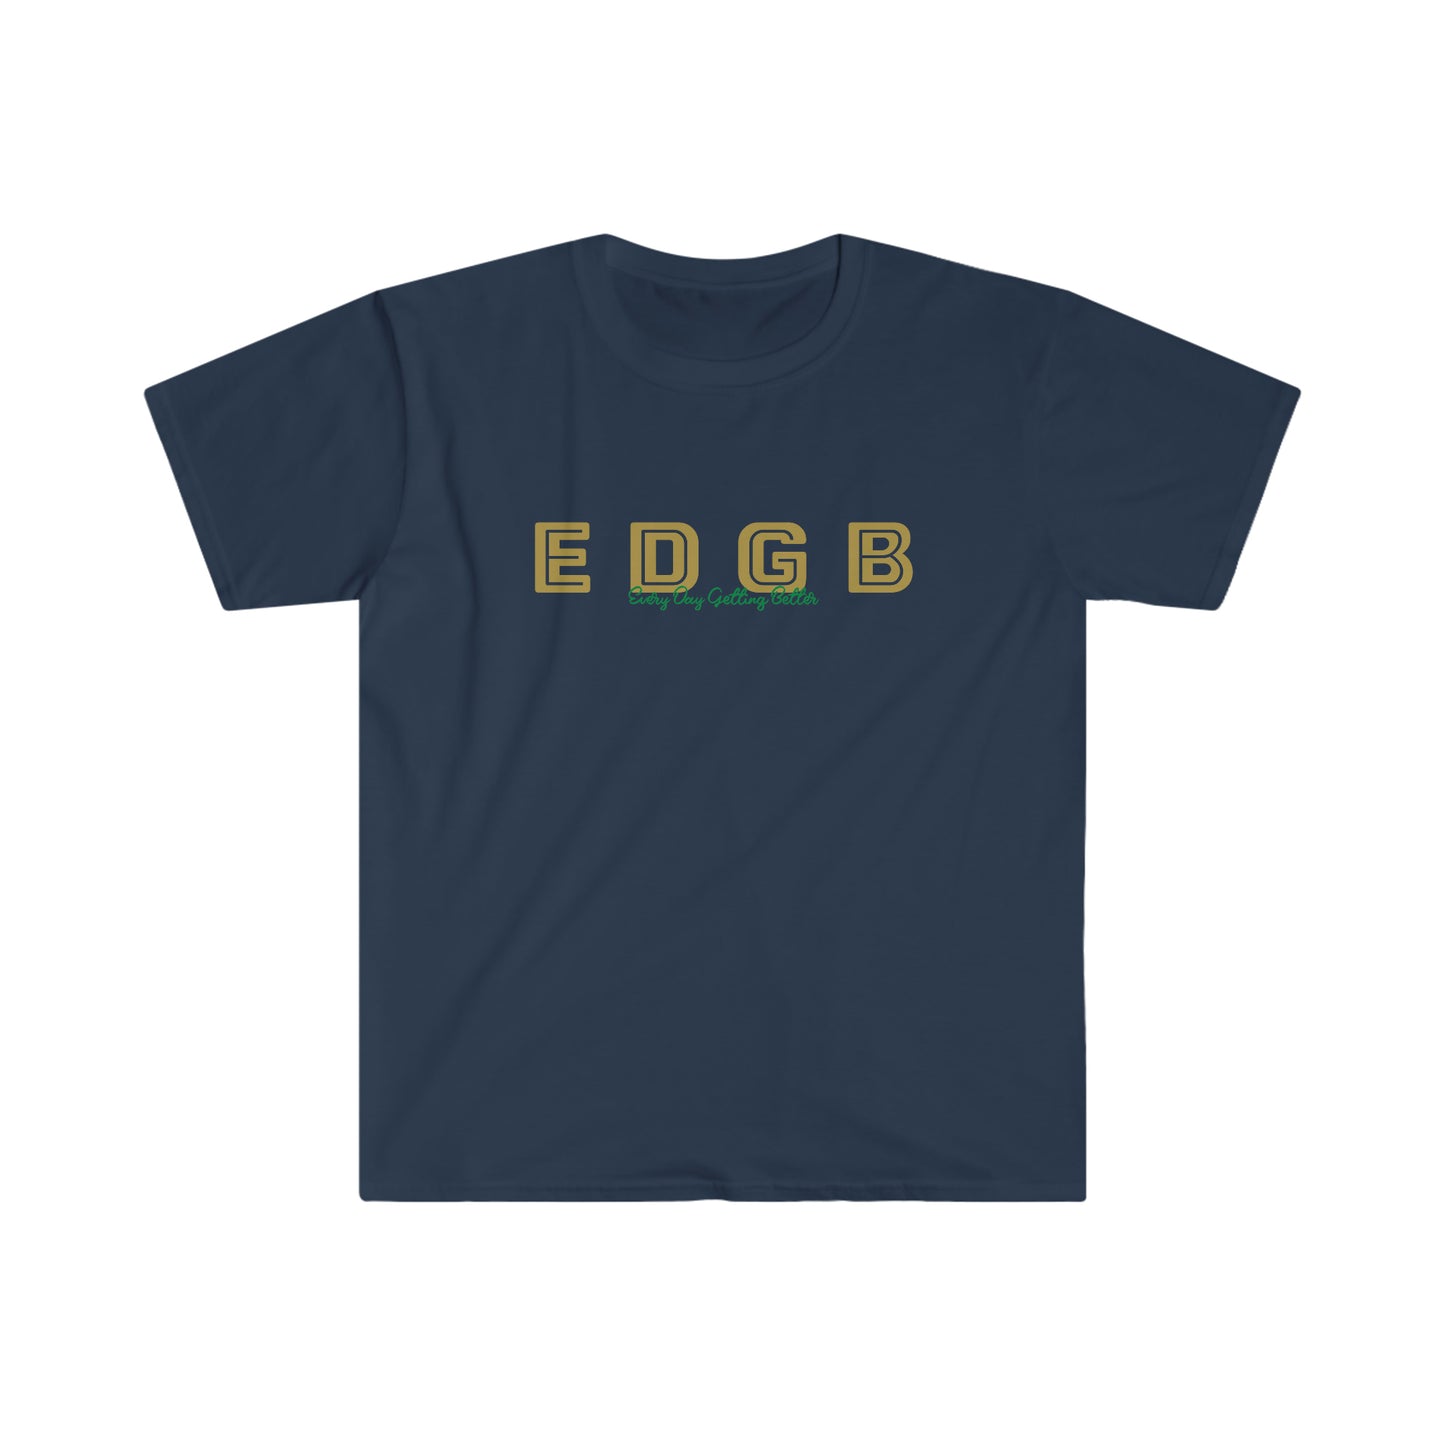 Every Day Getting Better - EDGB - Wakefield T-Shirt